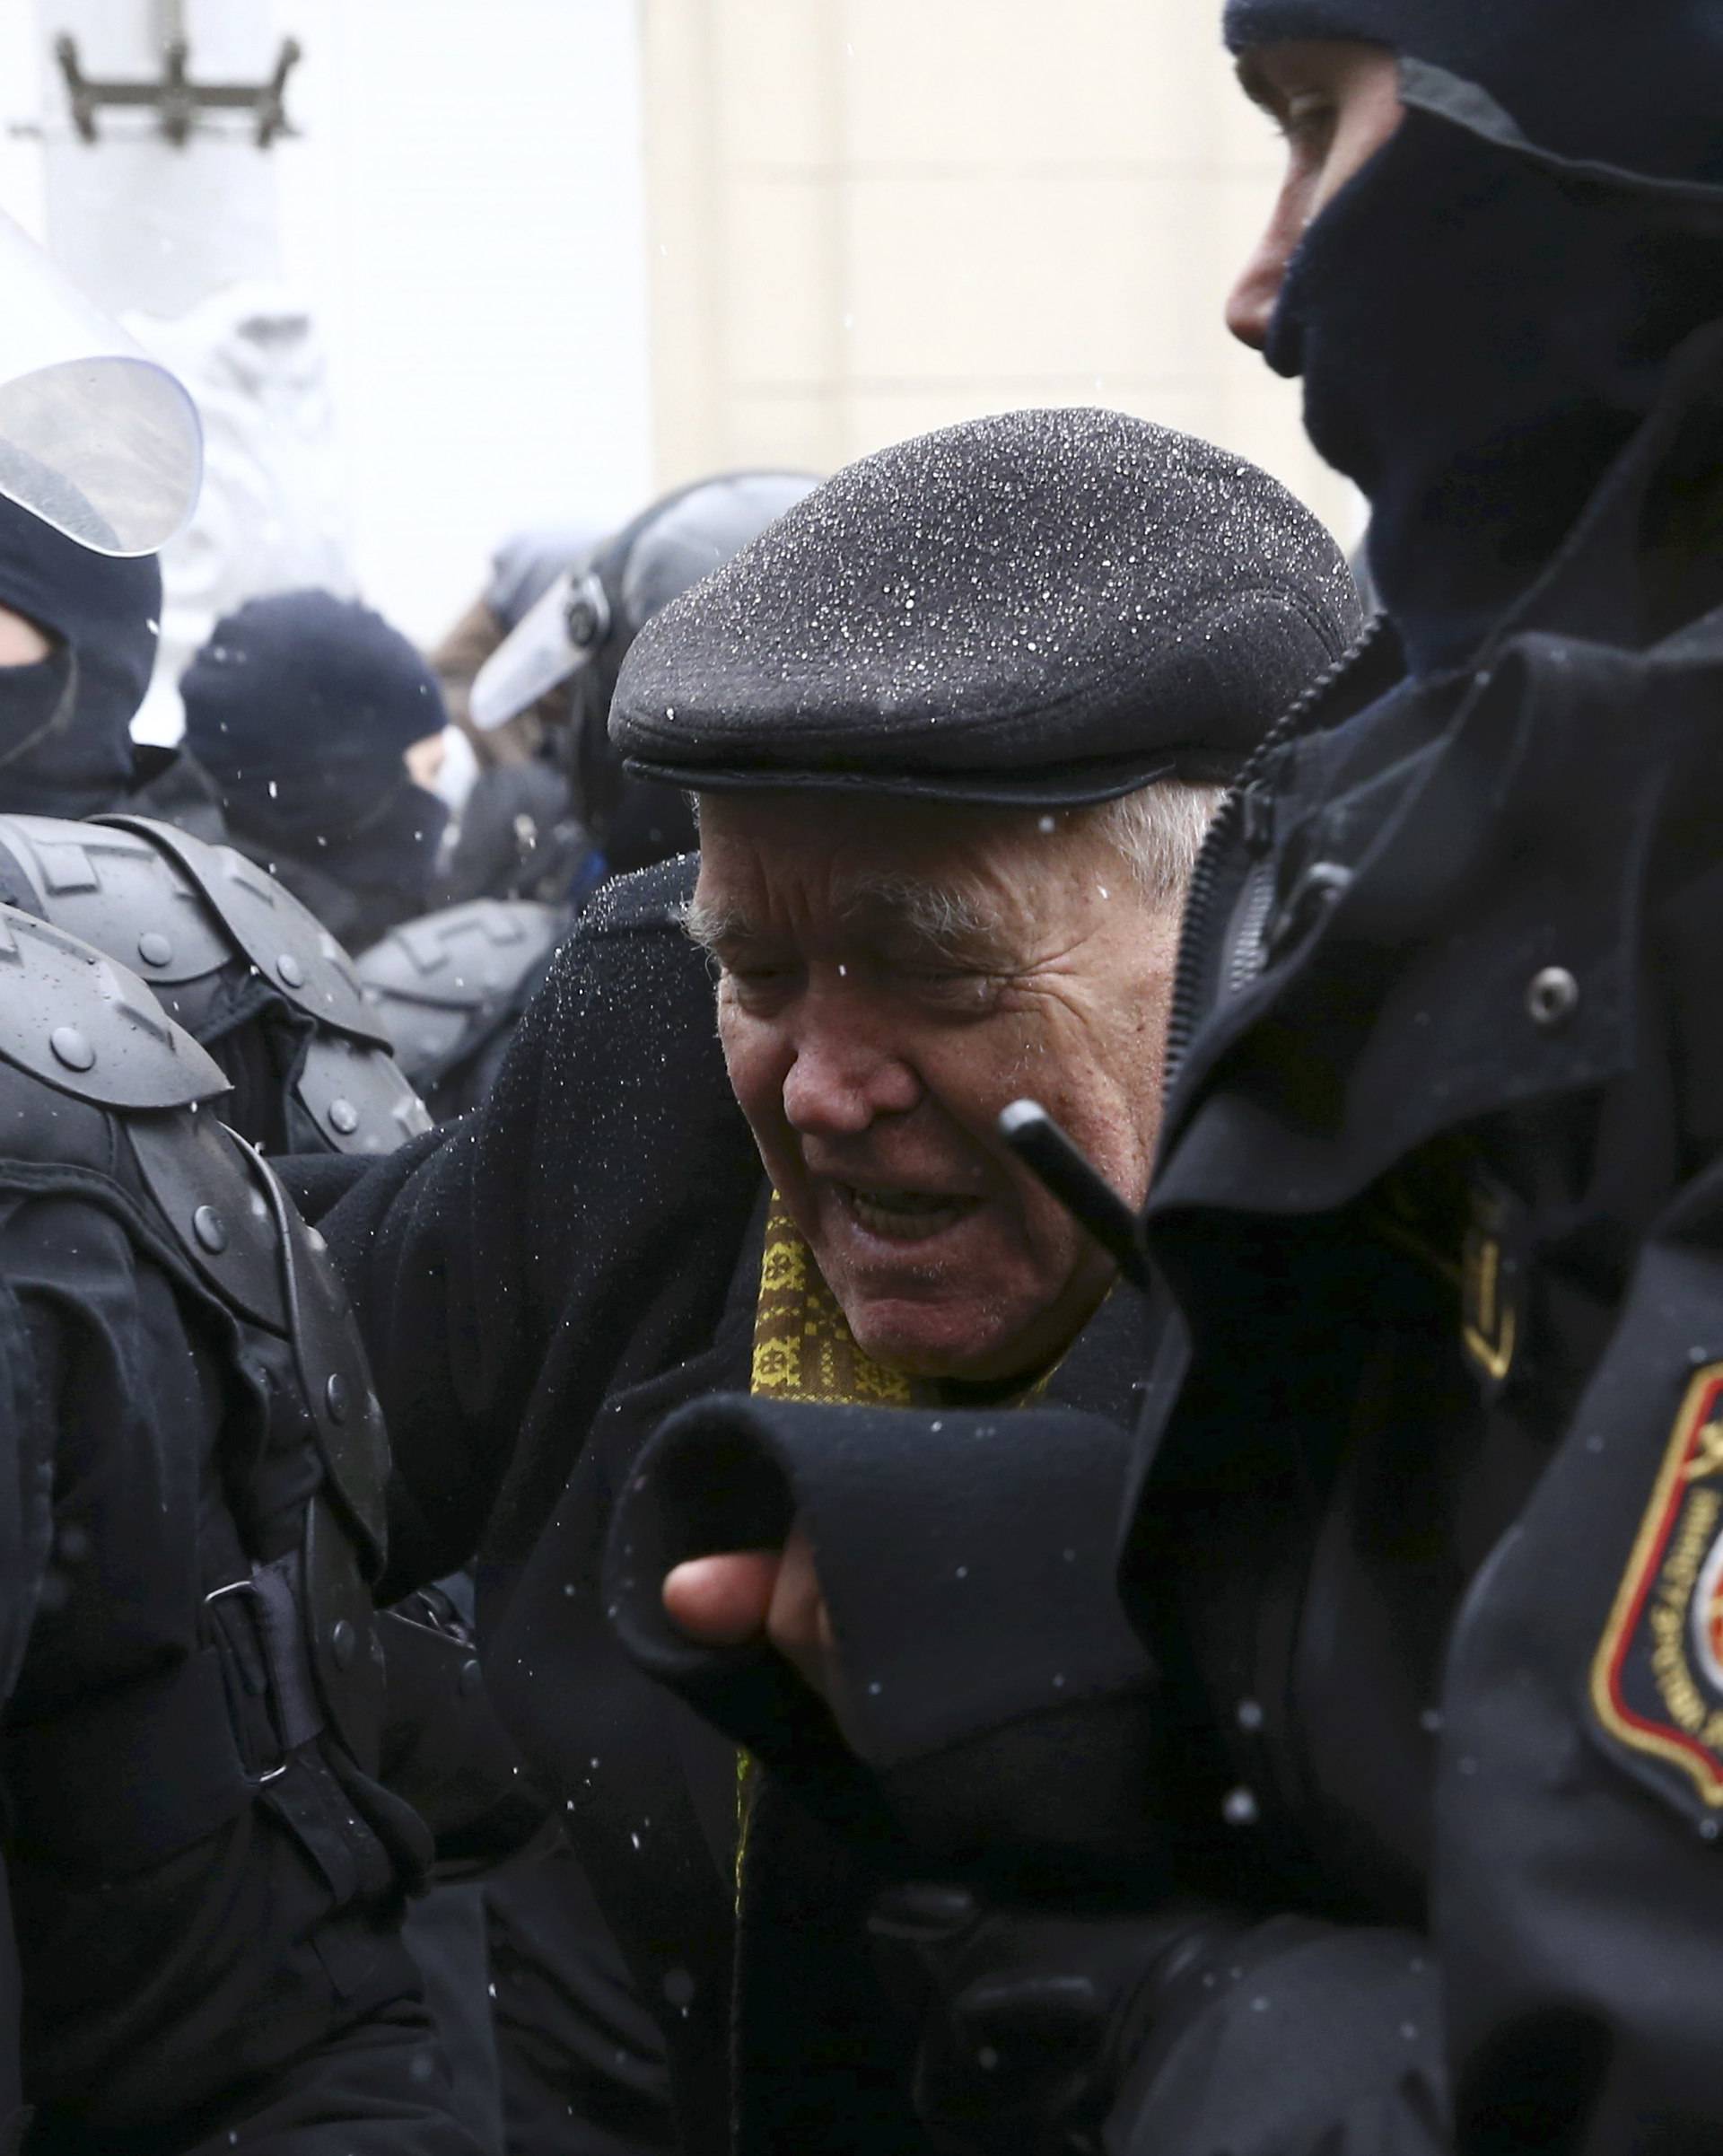 A man reacts during a gathering which marks the anniversary of the proclamation of the Belarussian People's Republic in Minsk